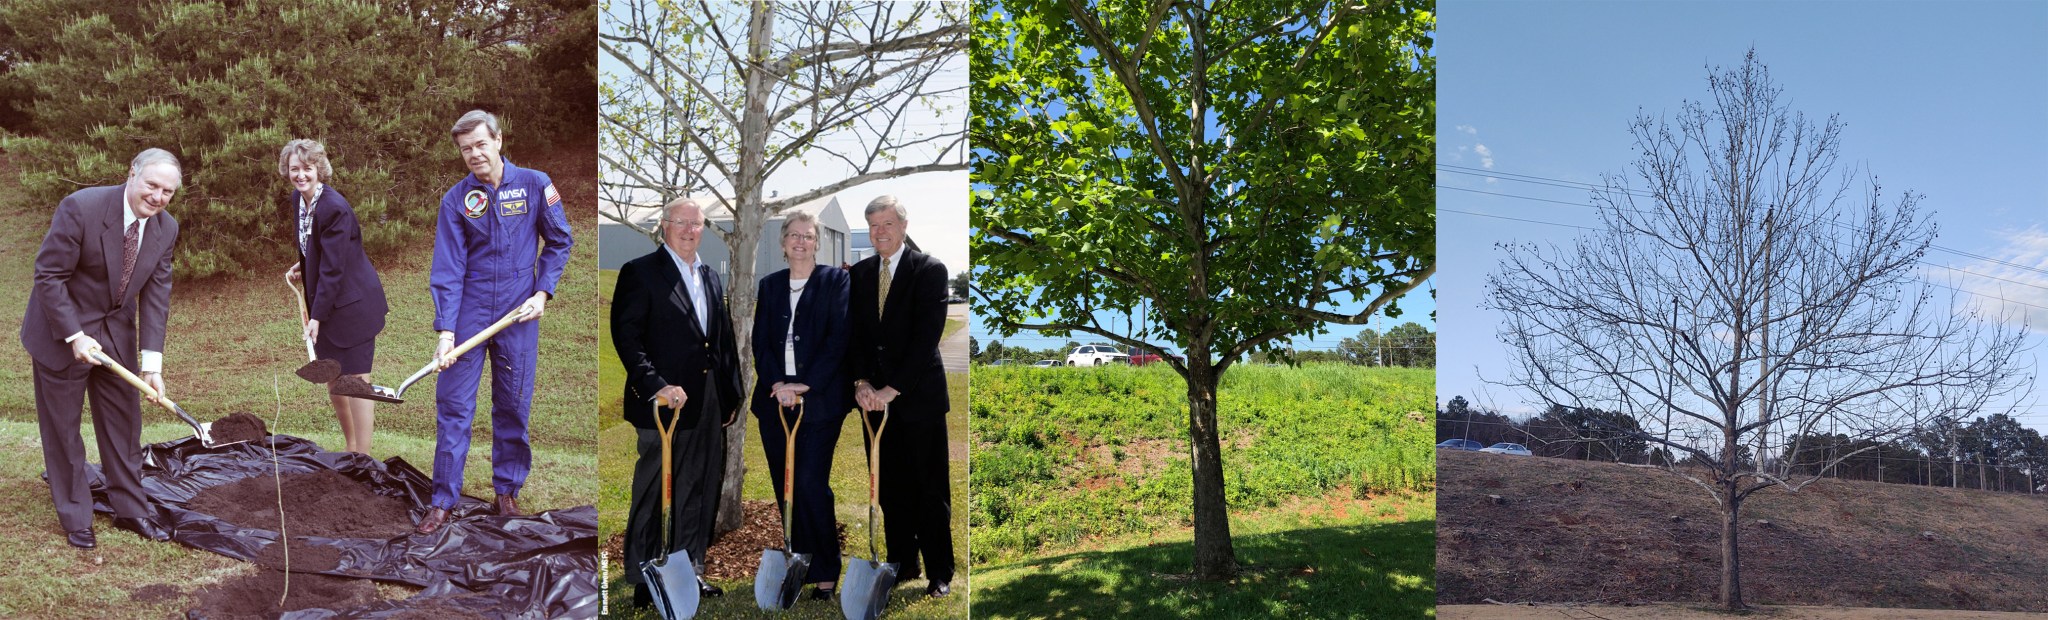 : A Half-Moon Tree is planted outside Building 4708 at Marshall in 1996 by center leaders of the time.